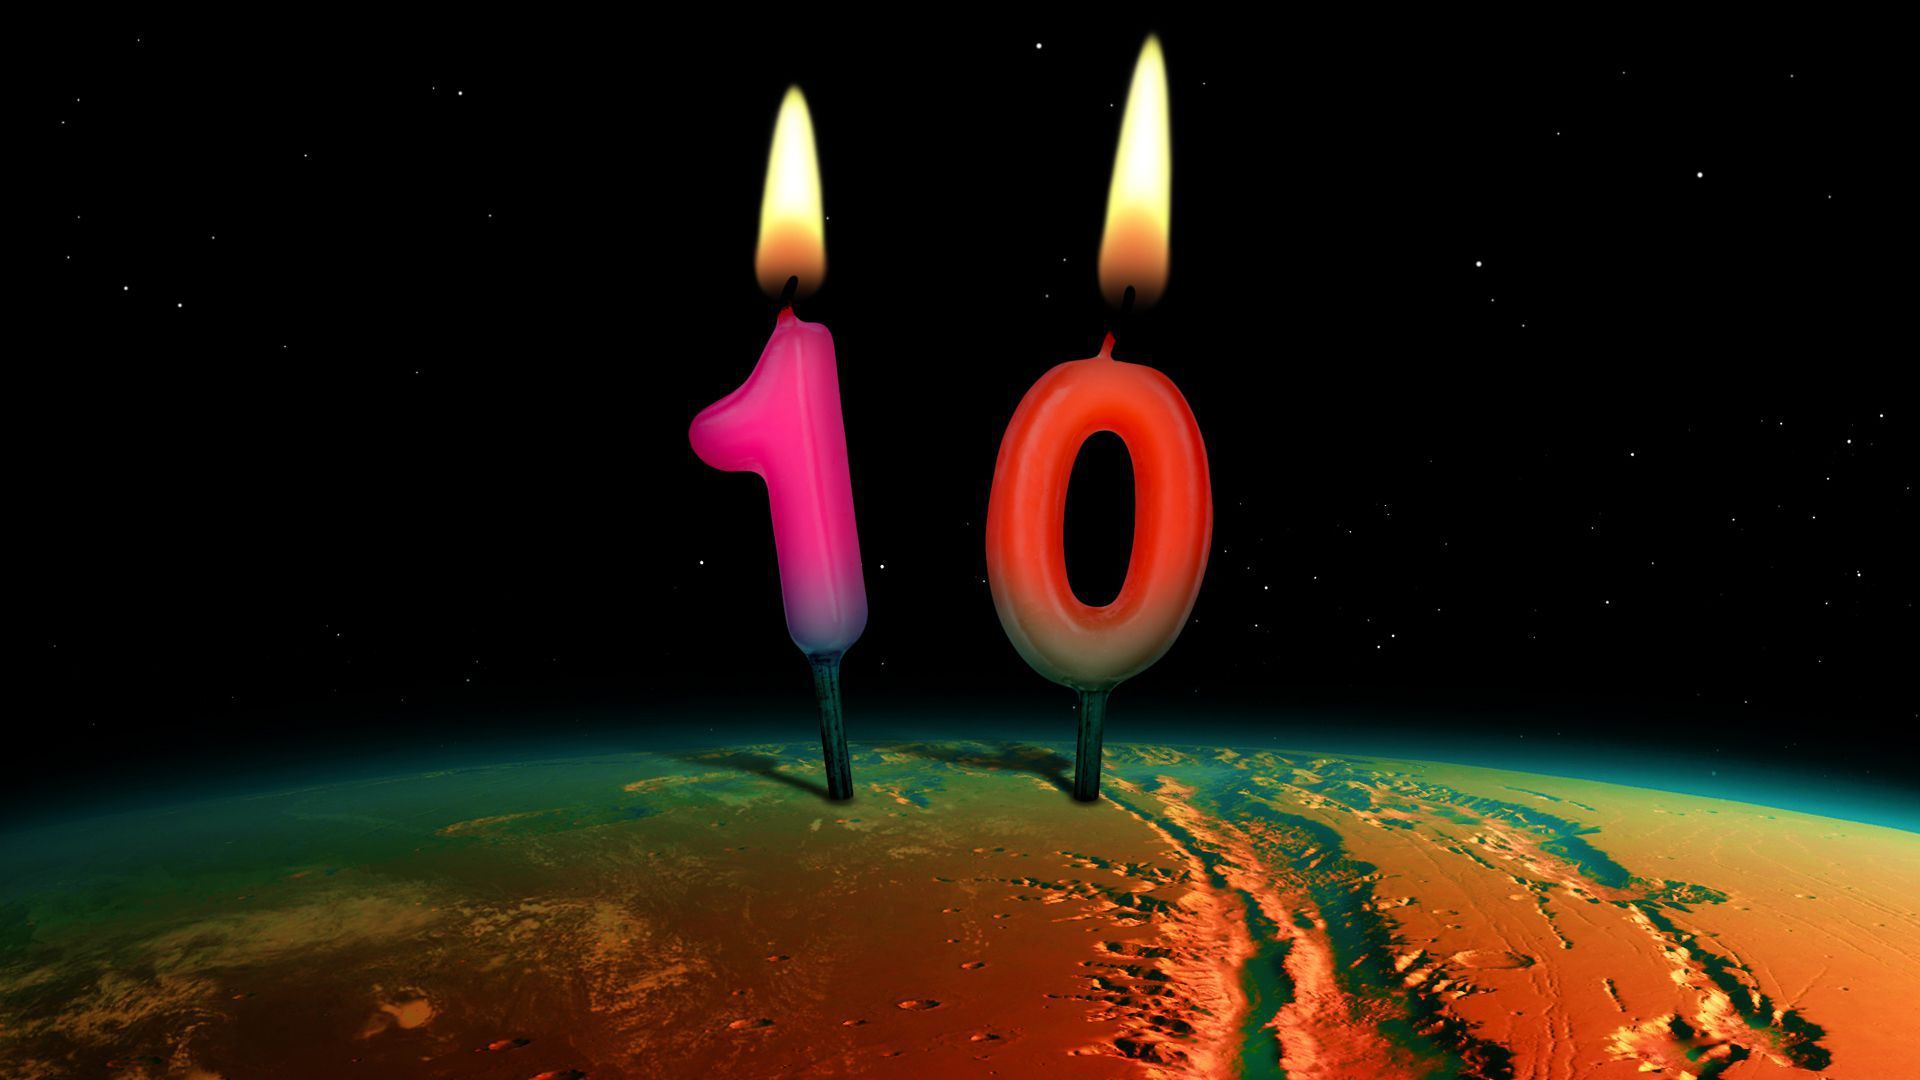 An illustration of '10' birthday candles on Mars.